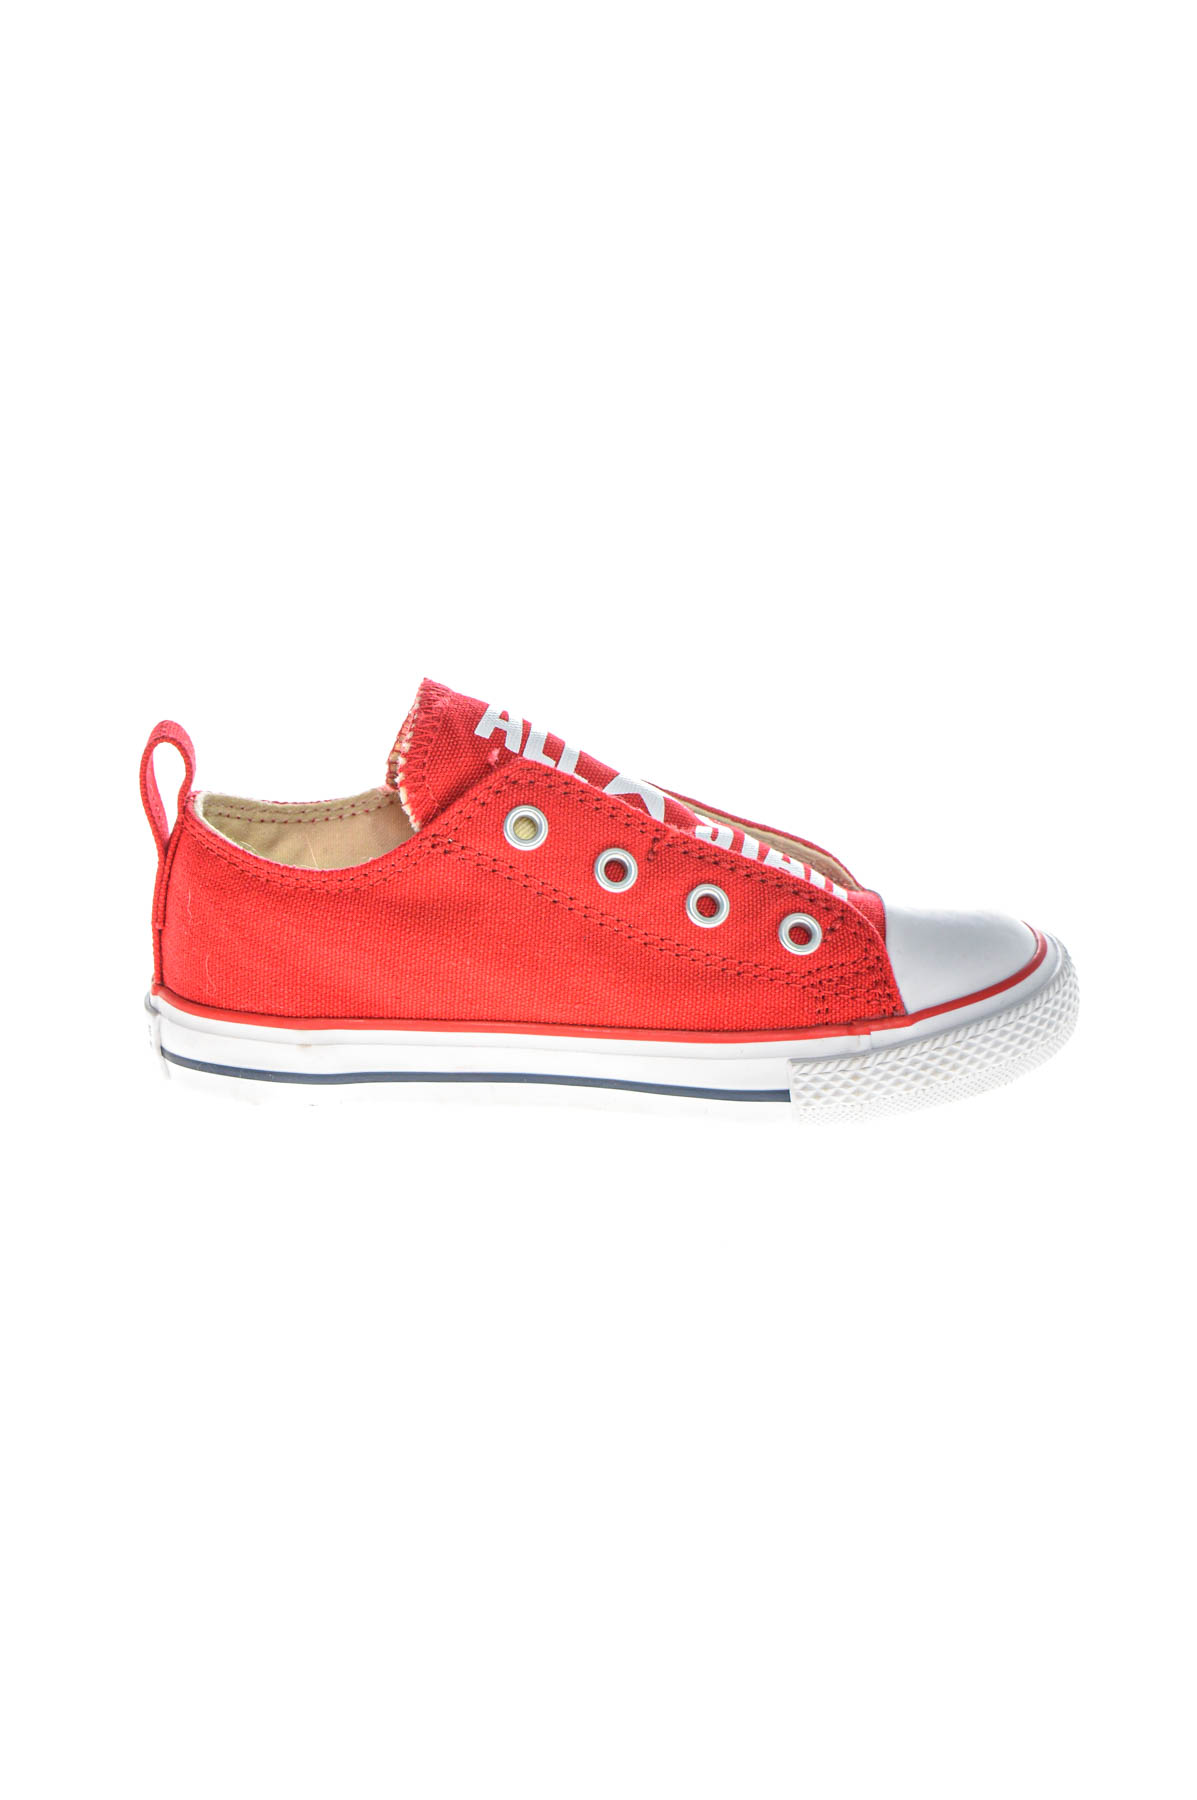 Sneakers for boys - Converse - 2